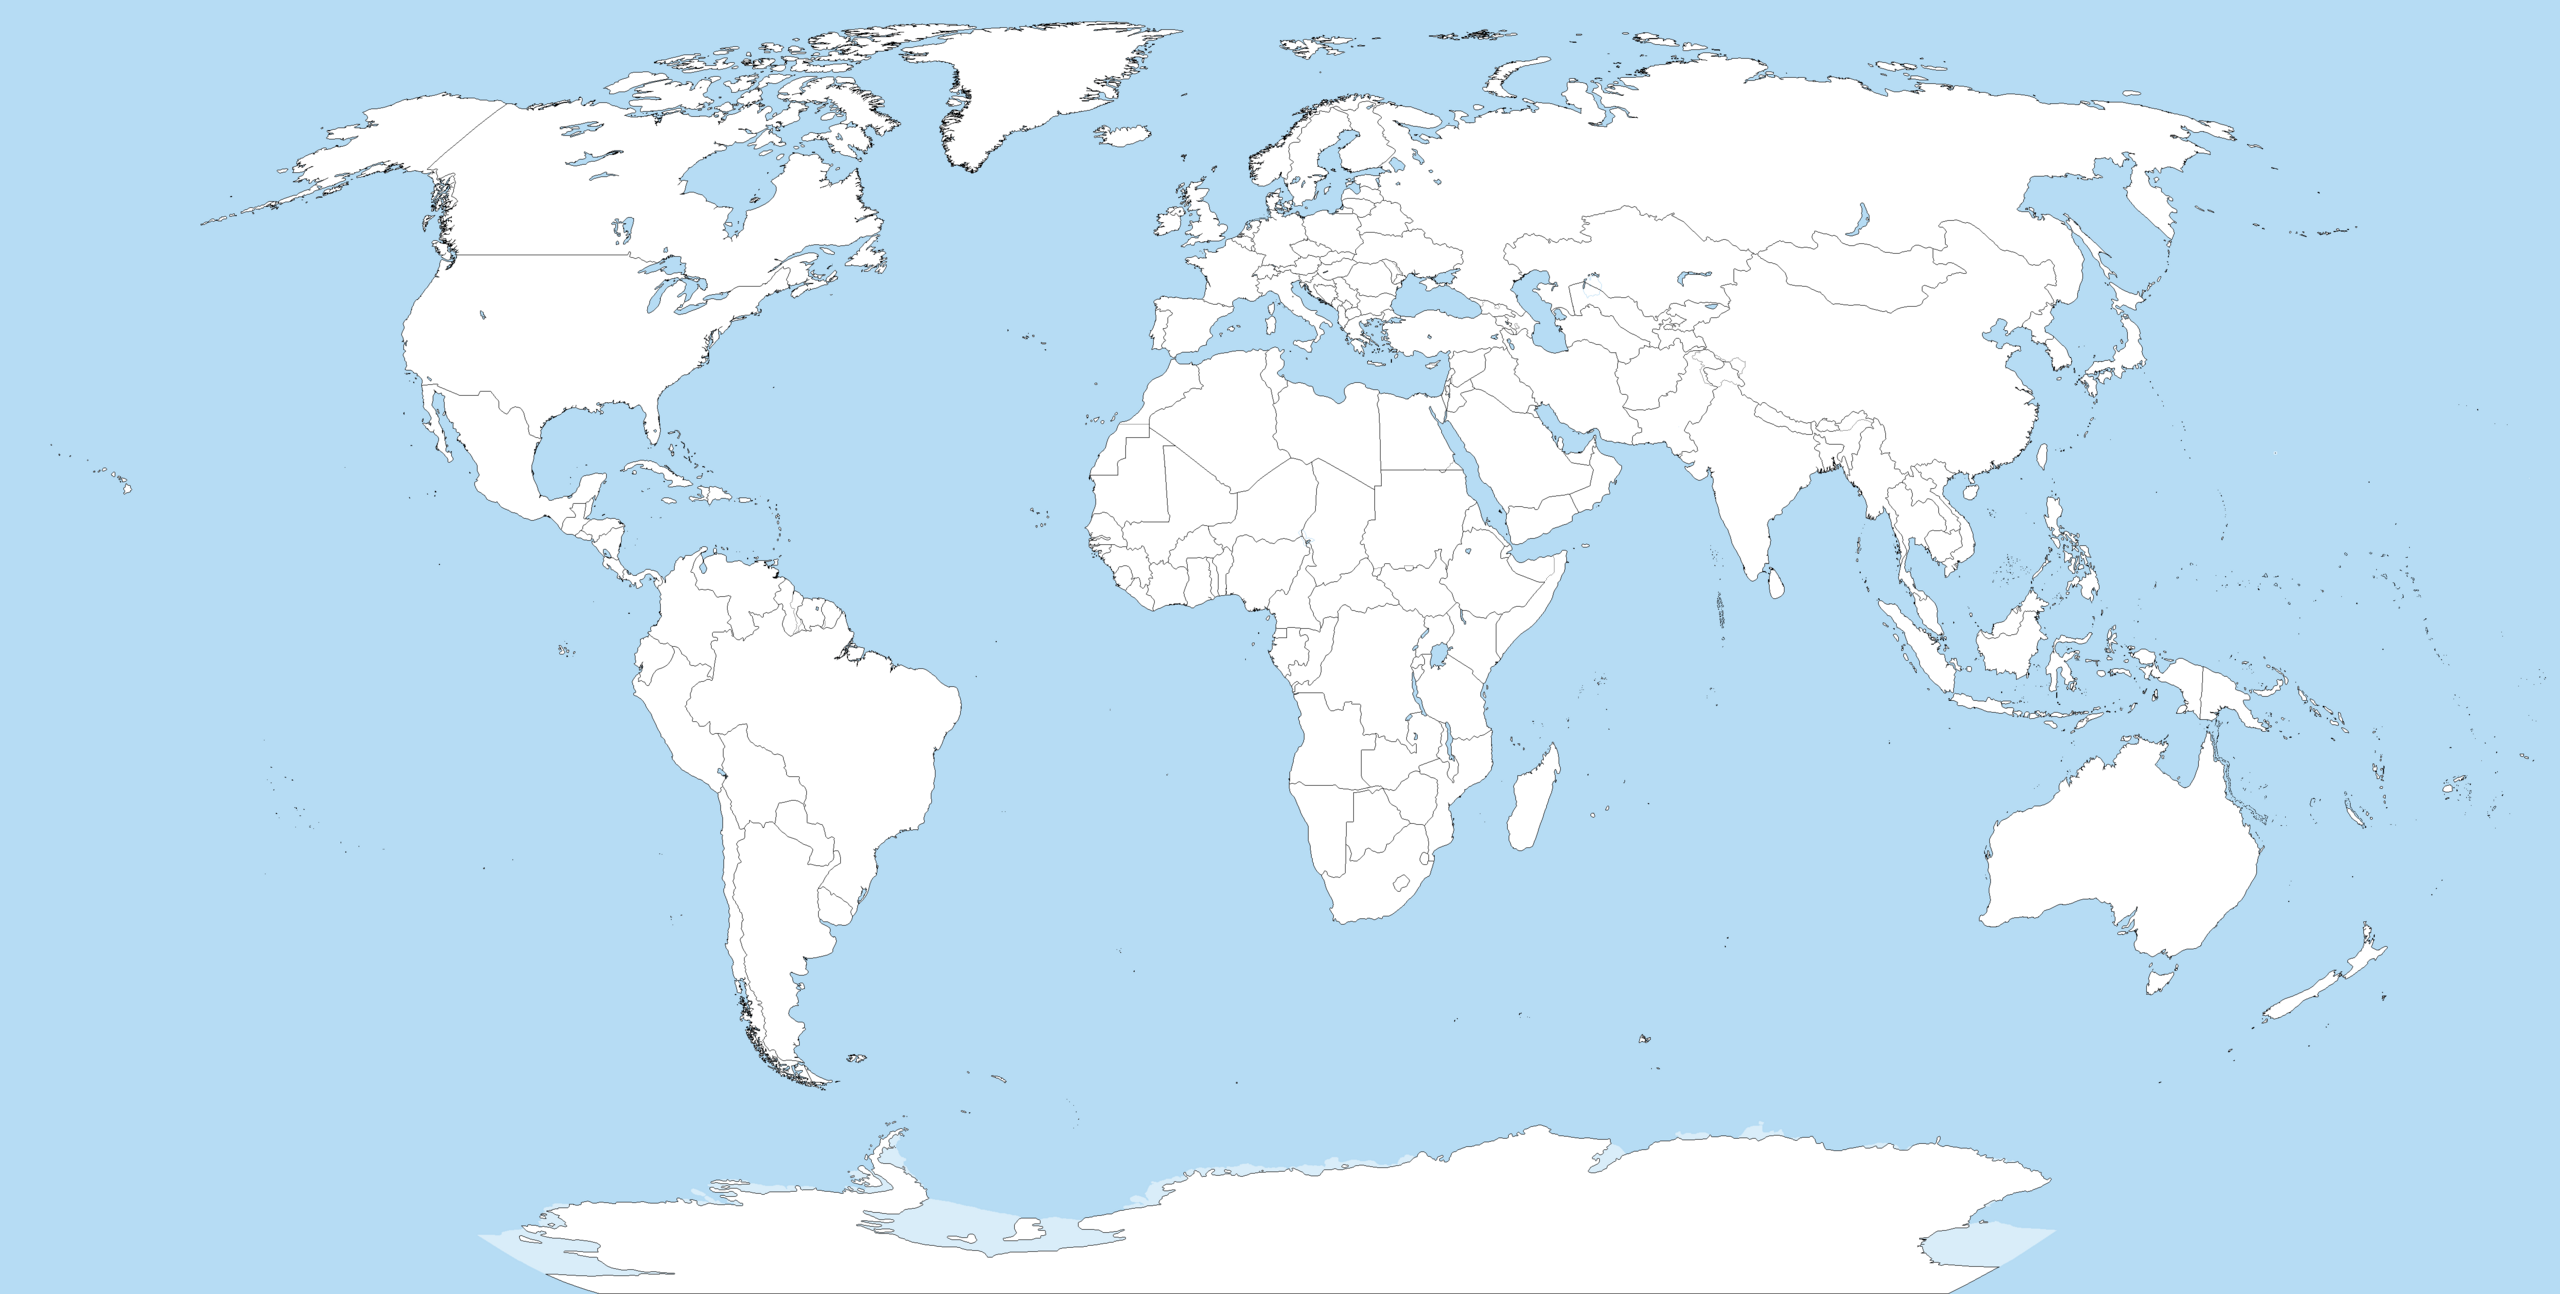 File:A large blank world map with oceans marked in blue.PNG - Wikipedia